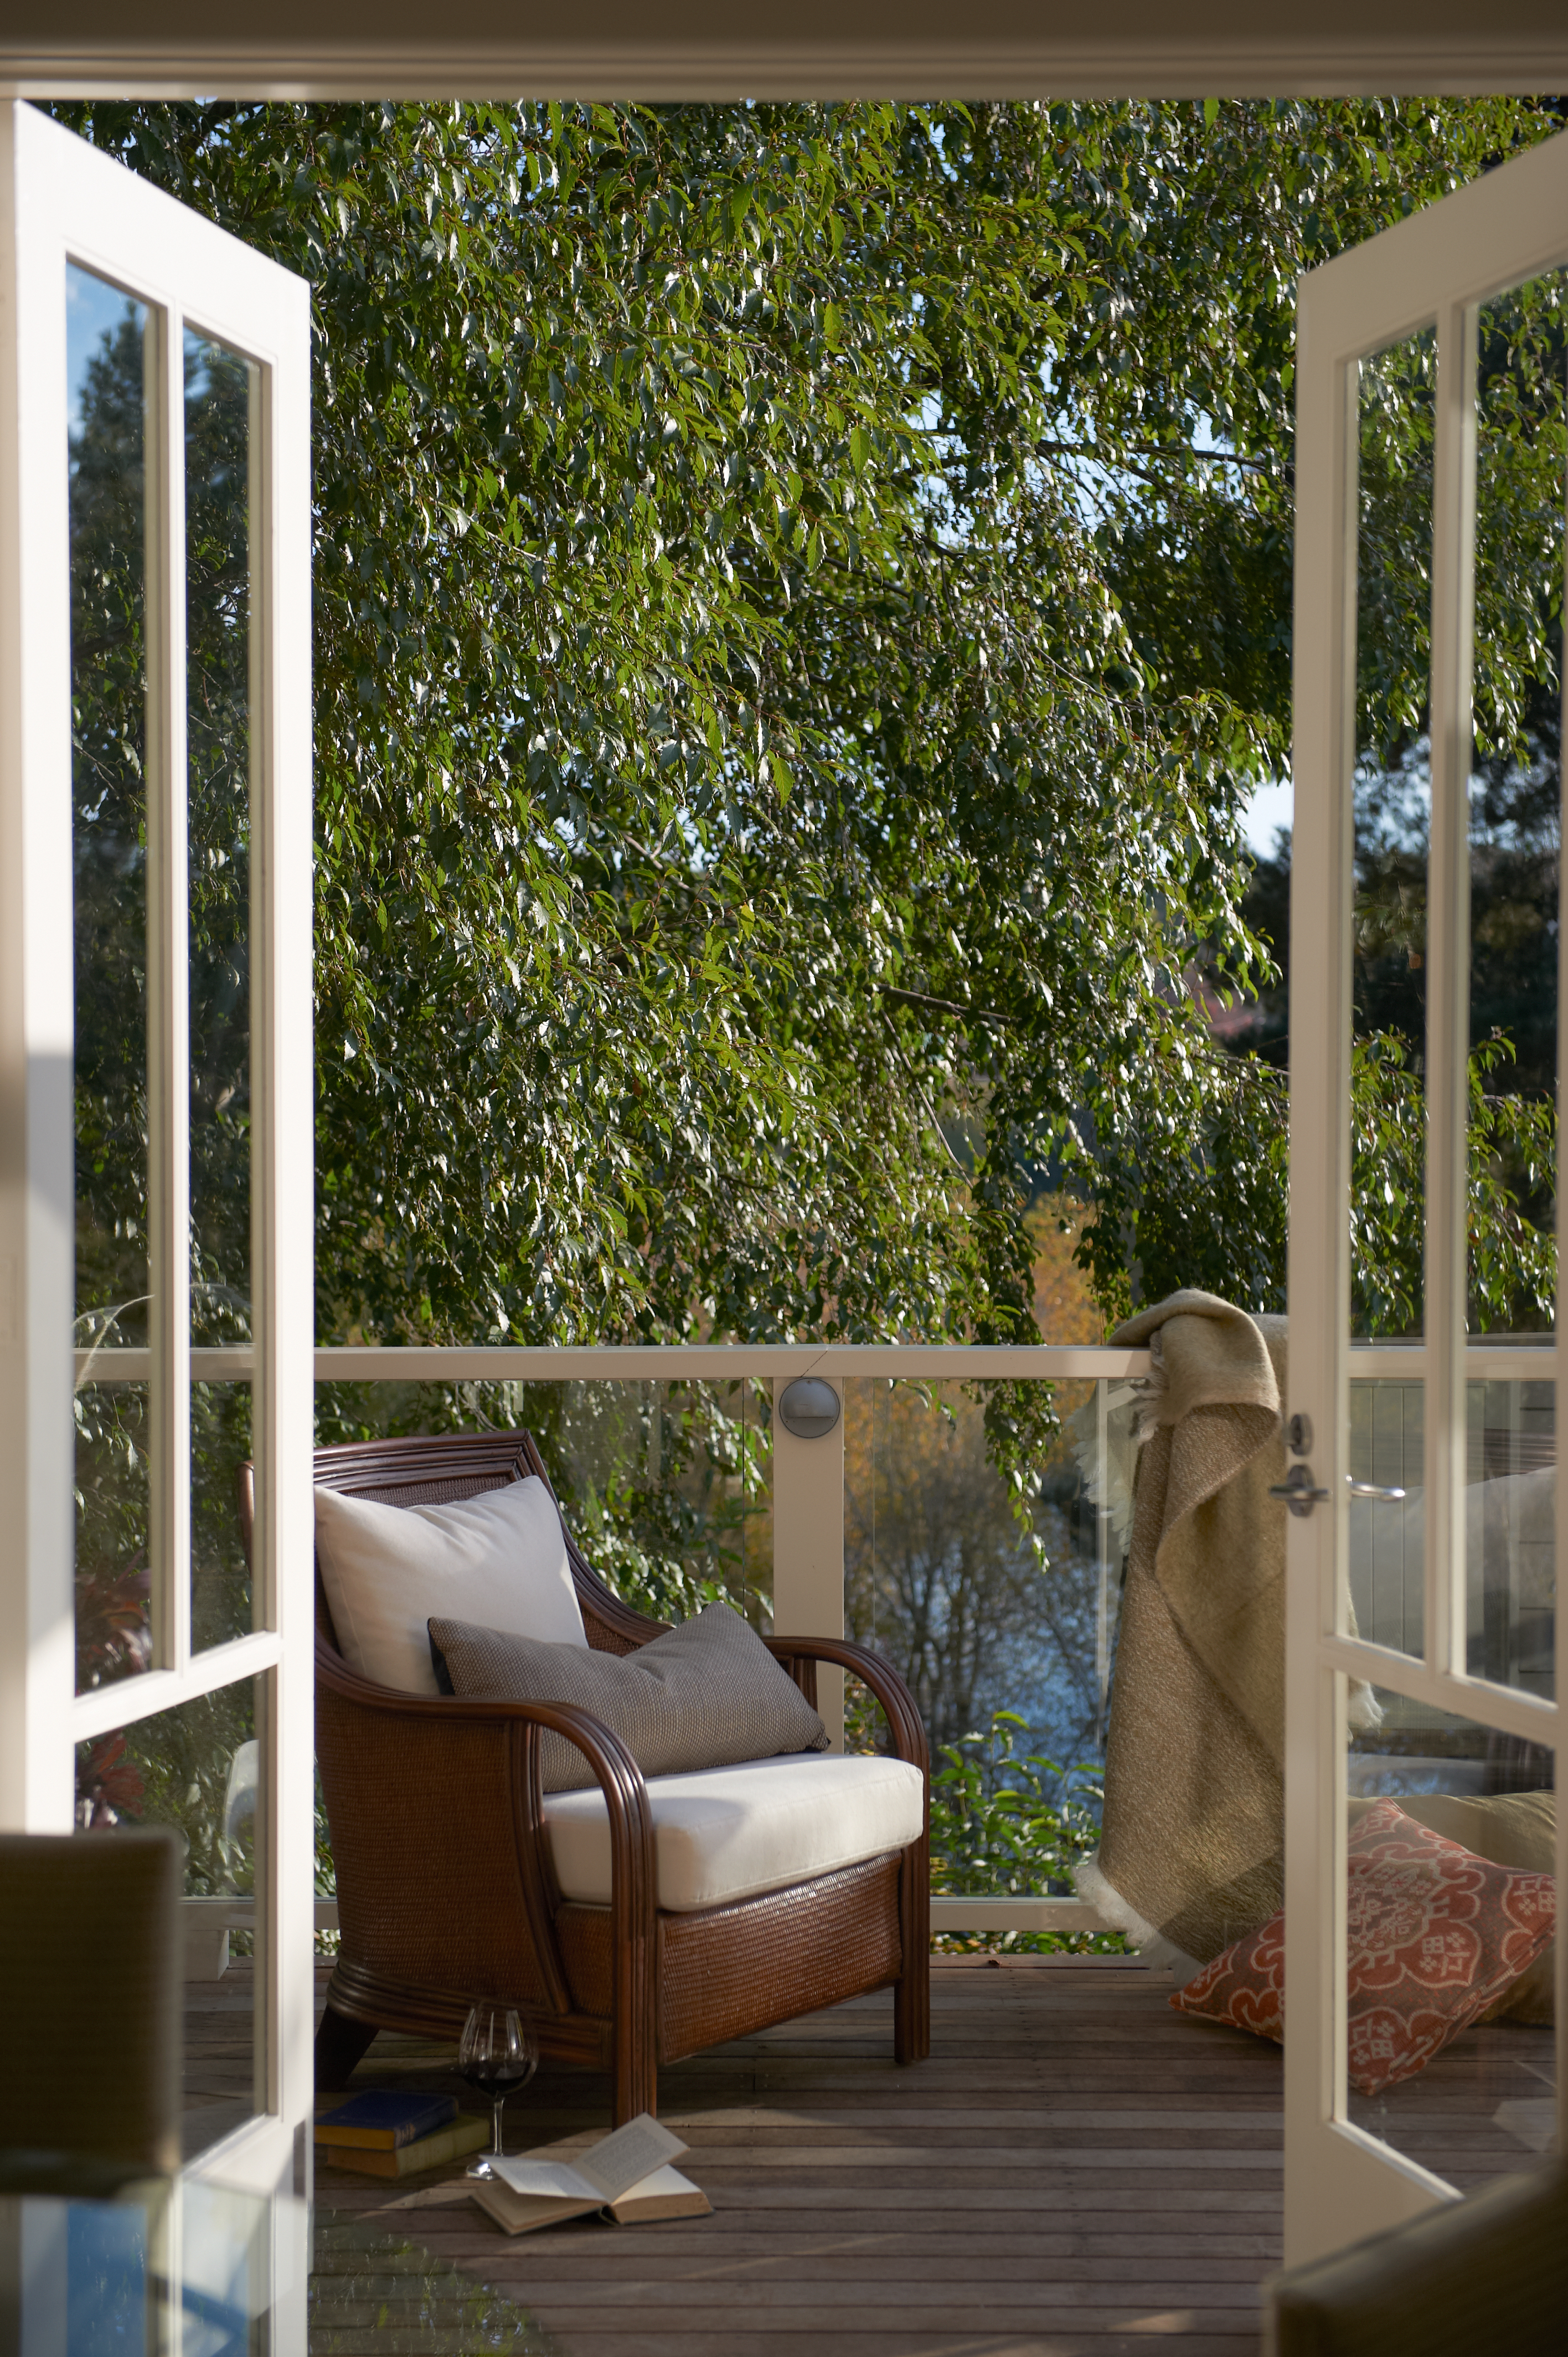 Lake House_Daylesford_Atrium Balcony - Click to view larger version